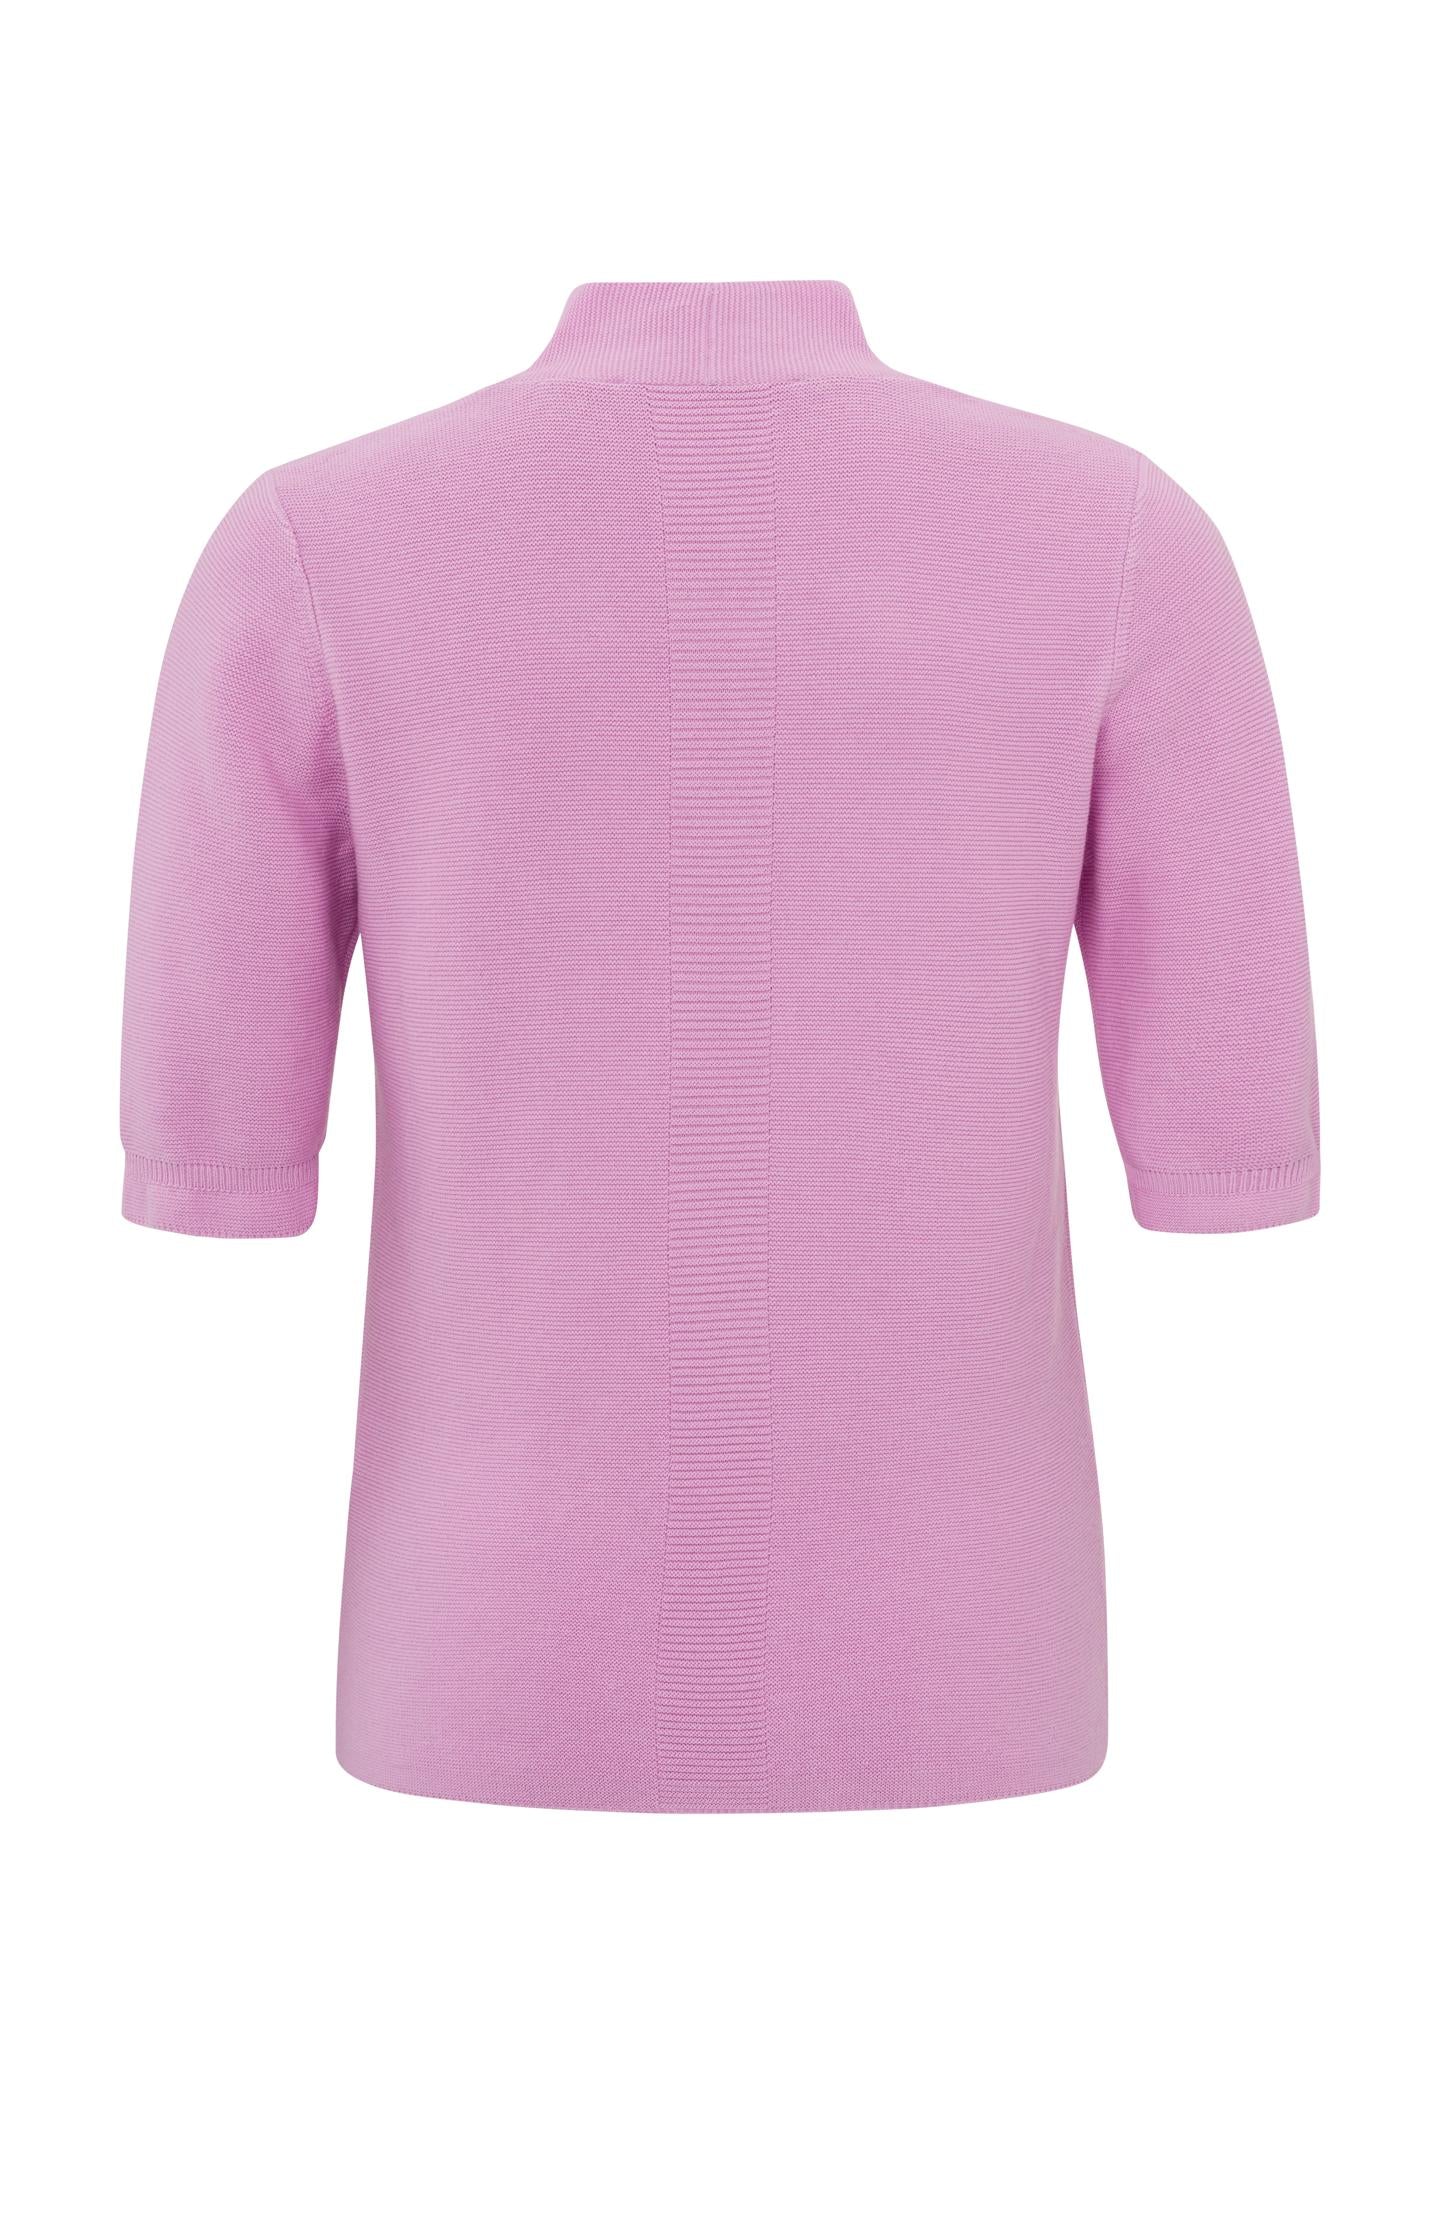 cotton-sweater-with-v-neck-and-halflong-sleeves-with-detail-phalaenopsis-pink_48657046-b1f0-4583-8bd6-b9ba681d32ff_1440x